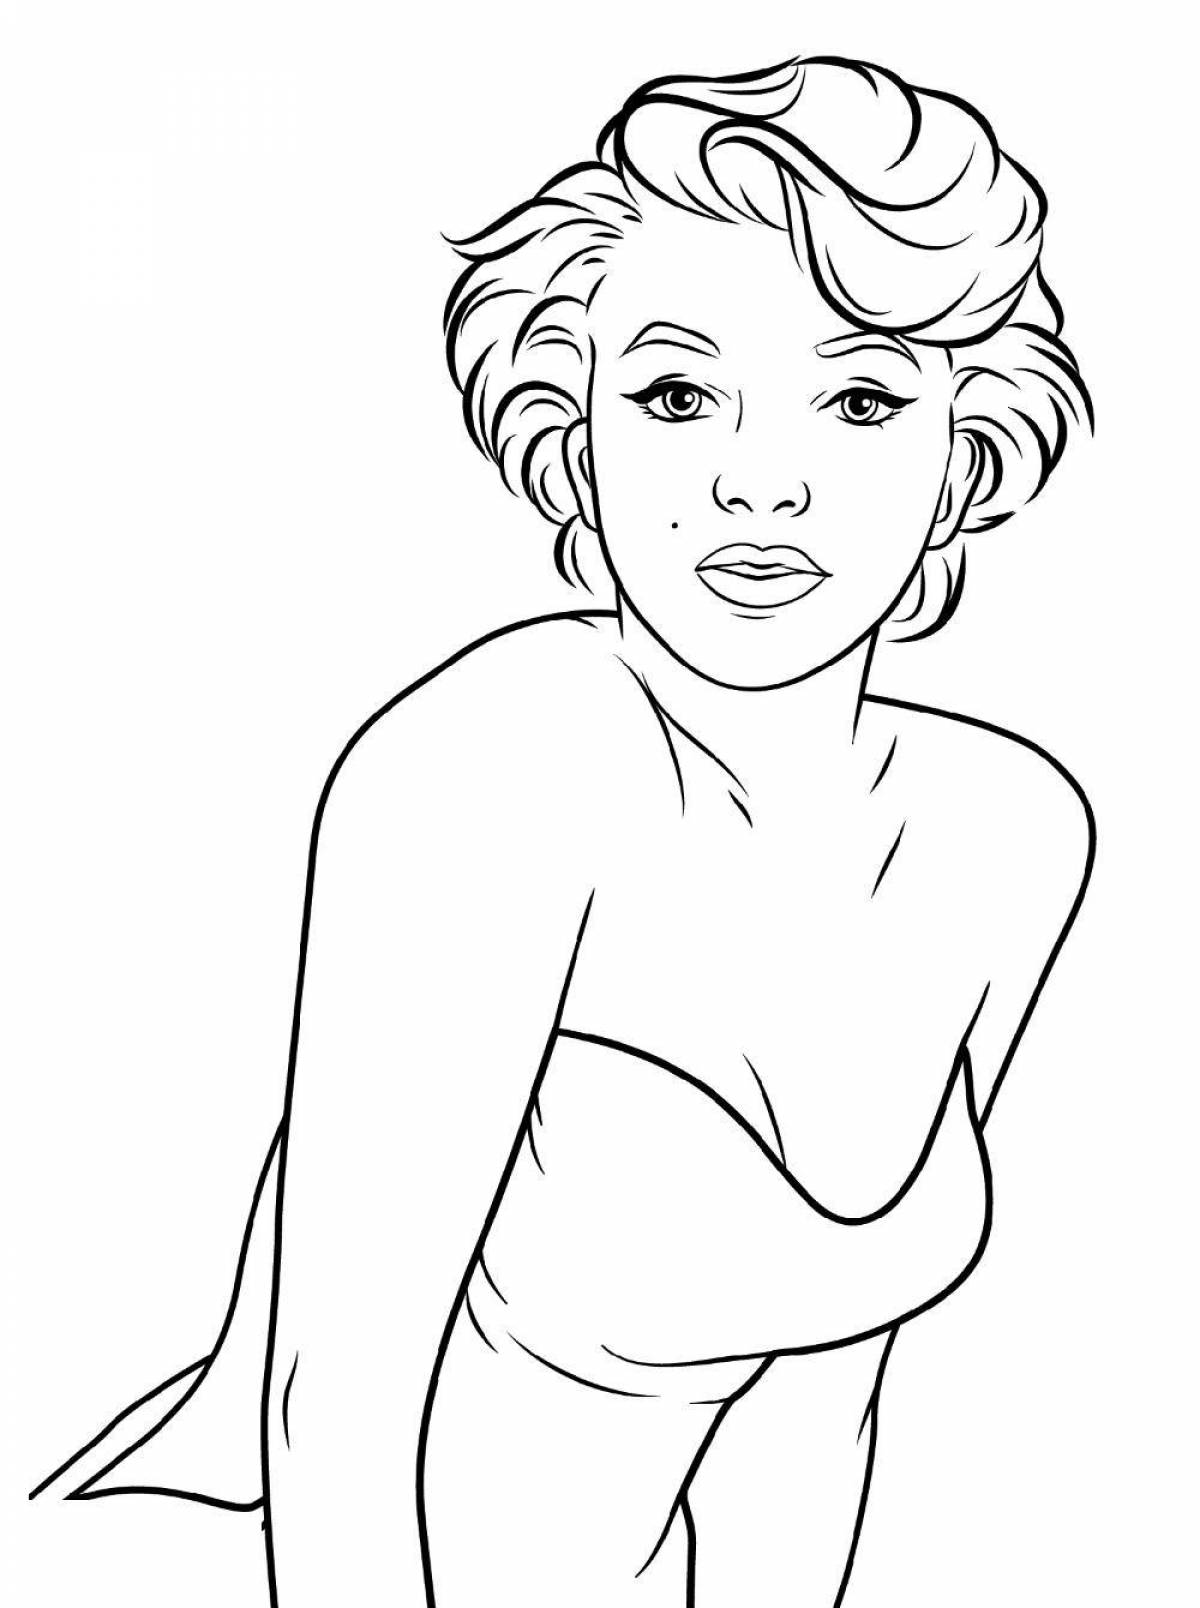 Colouring Marilyn Monroe obsessed with flowers